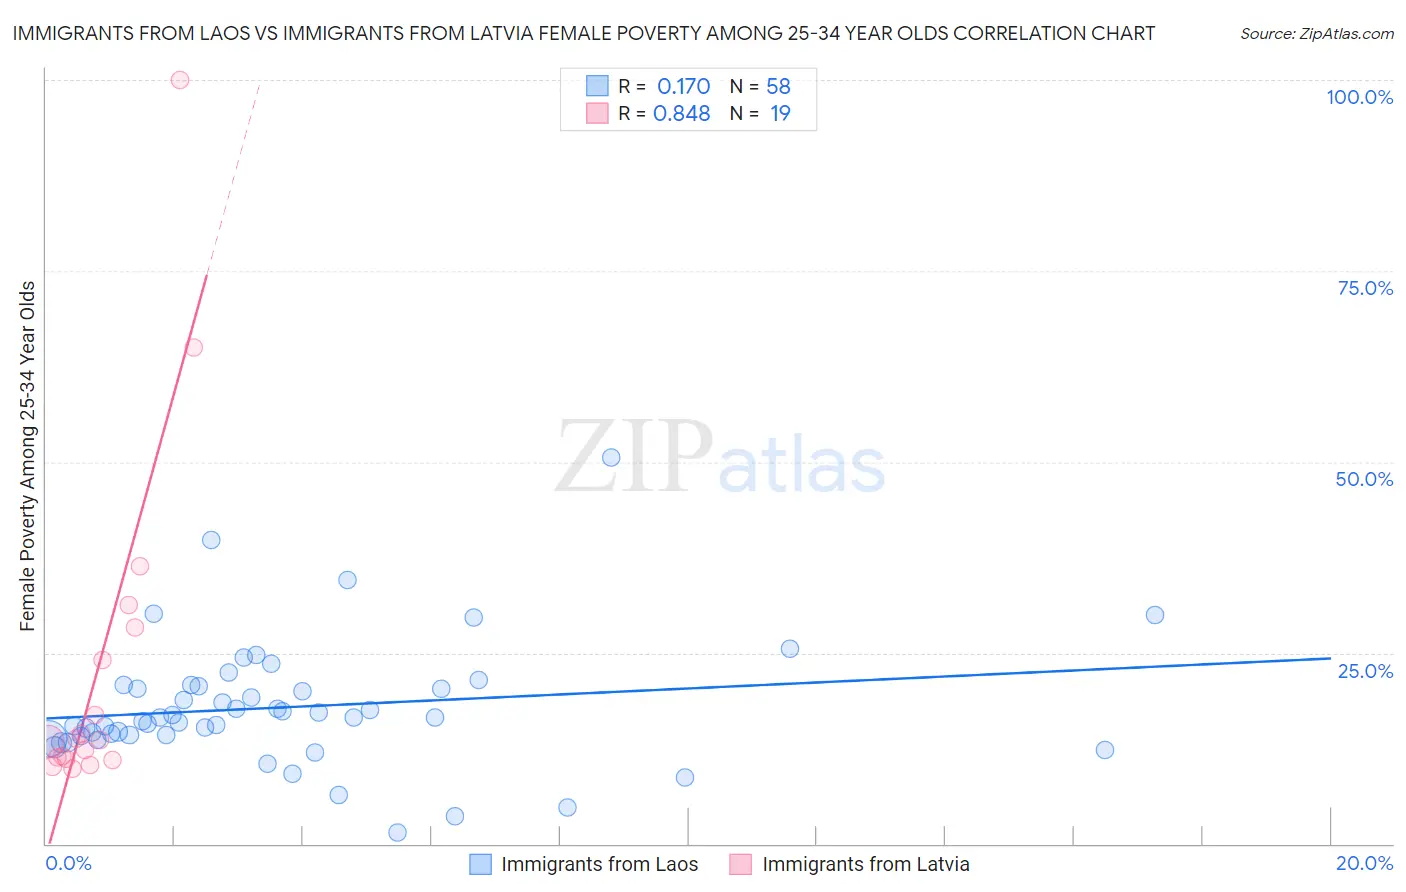 Immigrants from Laos vs Immigrants from Latvia Female Poverty Among 25-34 Year Olds